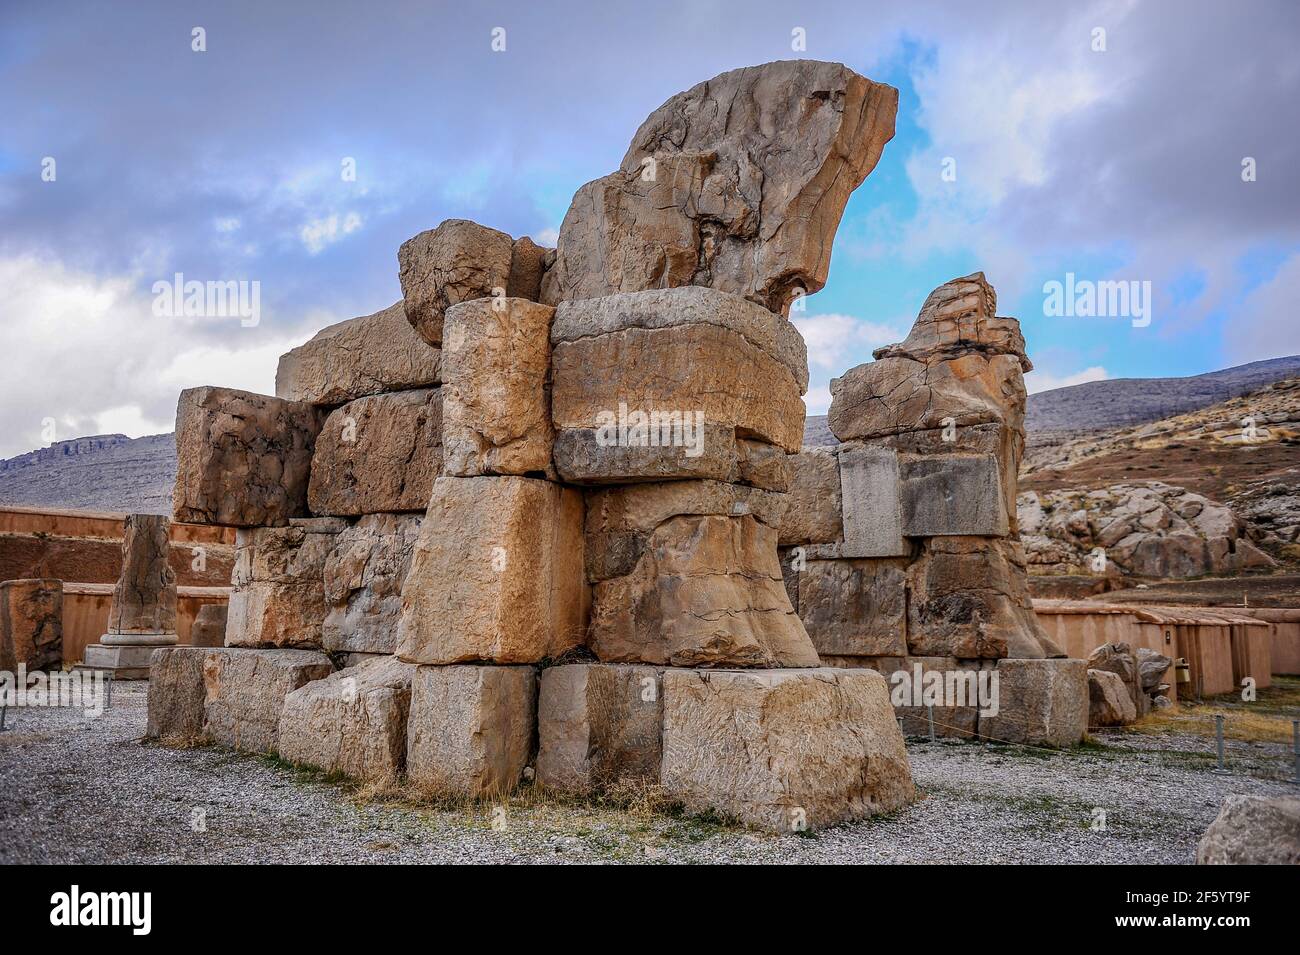 Ruins of the Unfinished Gates at the ancient capital of the Persian Empire Persepolis, located near Shiraz in Iran Stock Photo